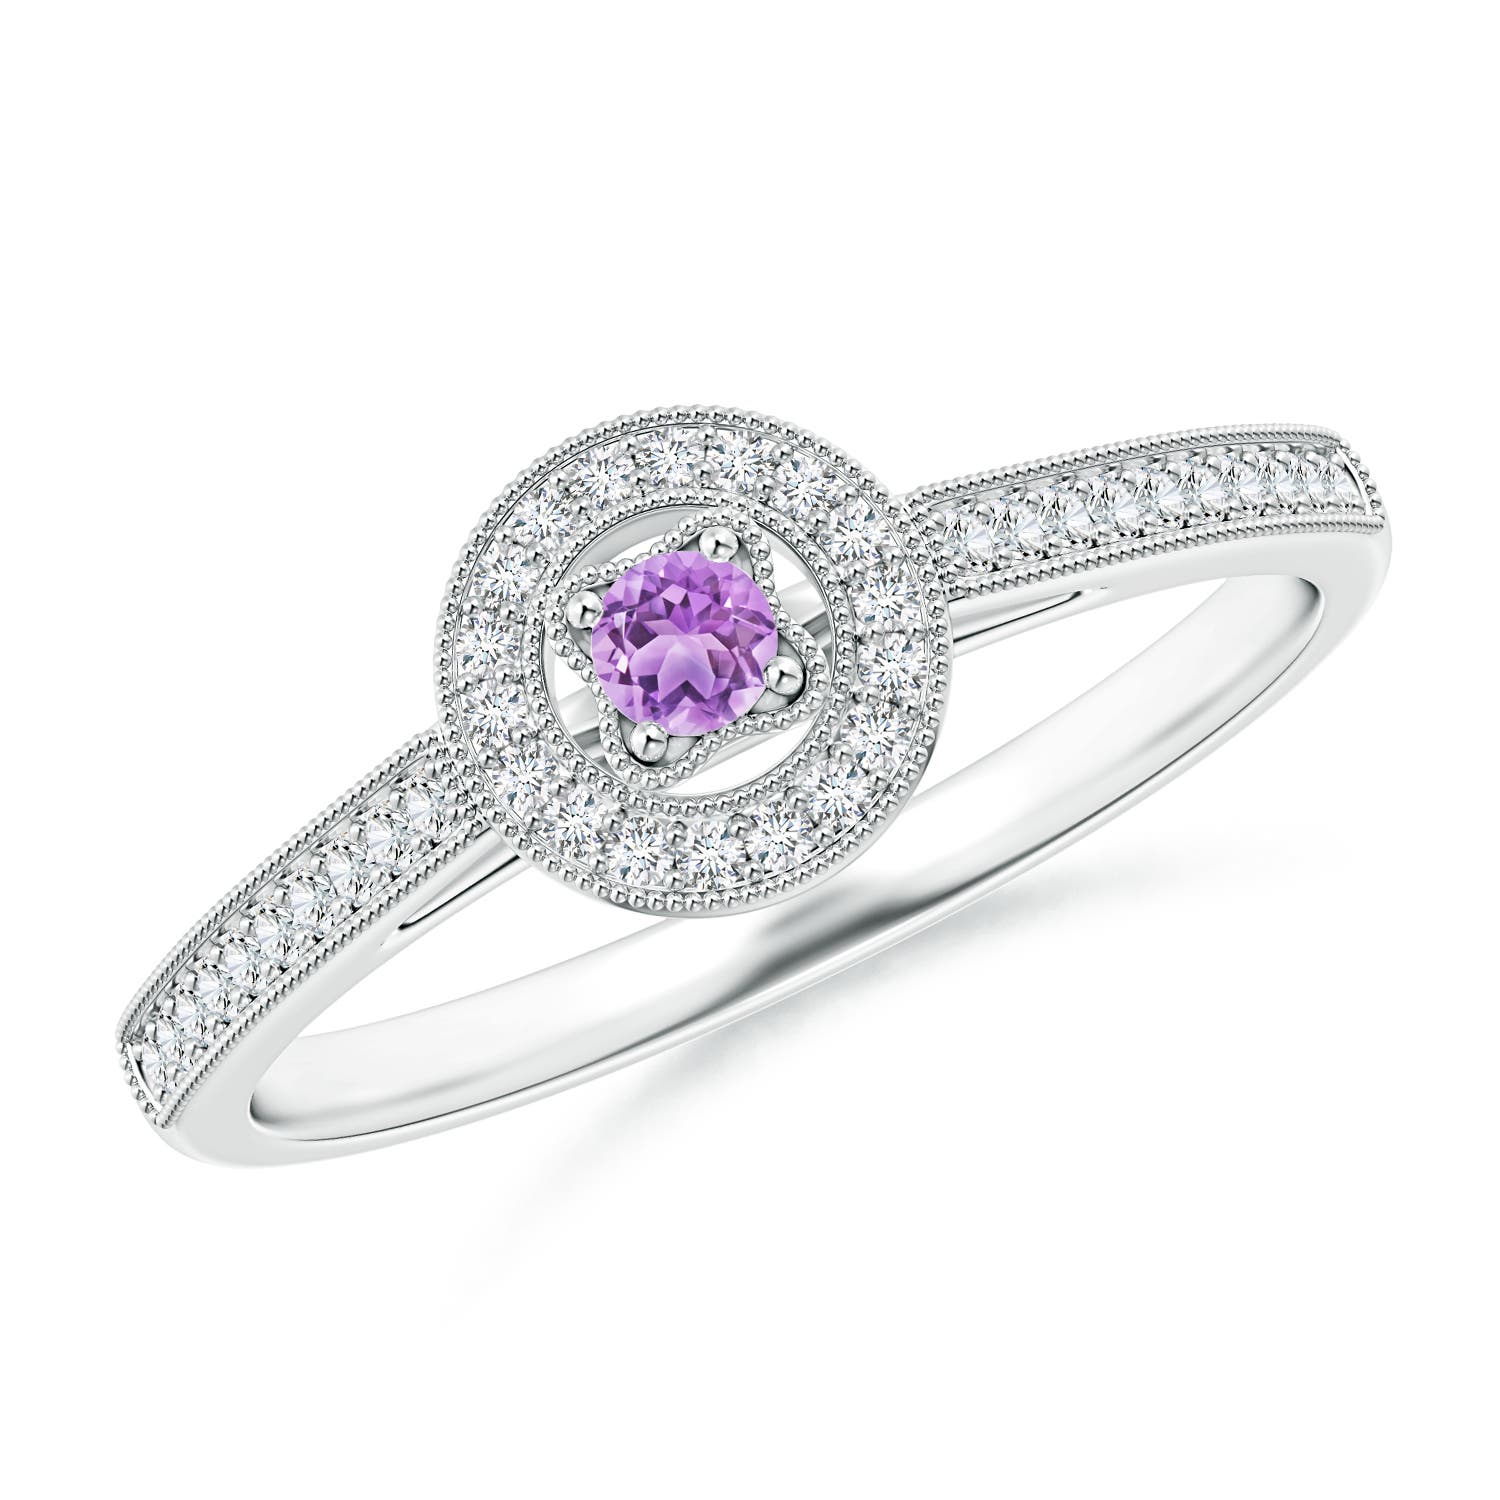 AAA - Amethyst / 0.19 CT / 14 KT White Gold